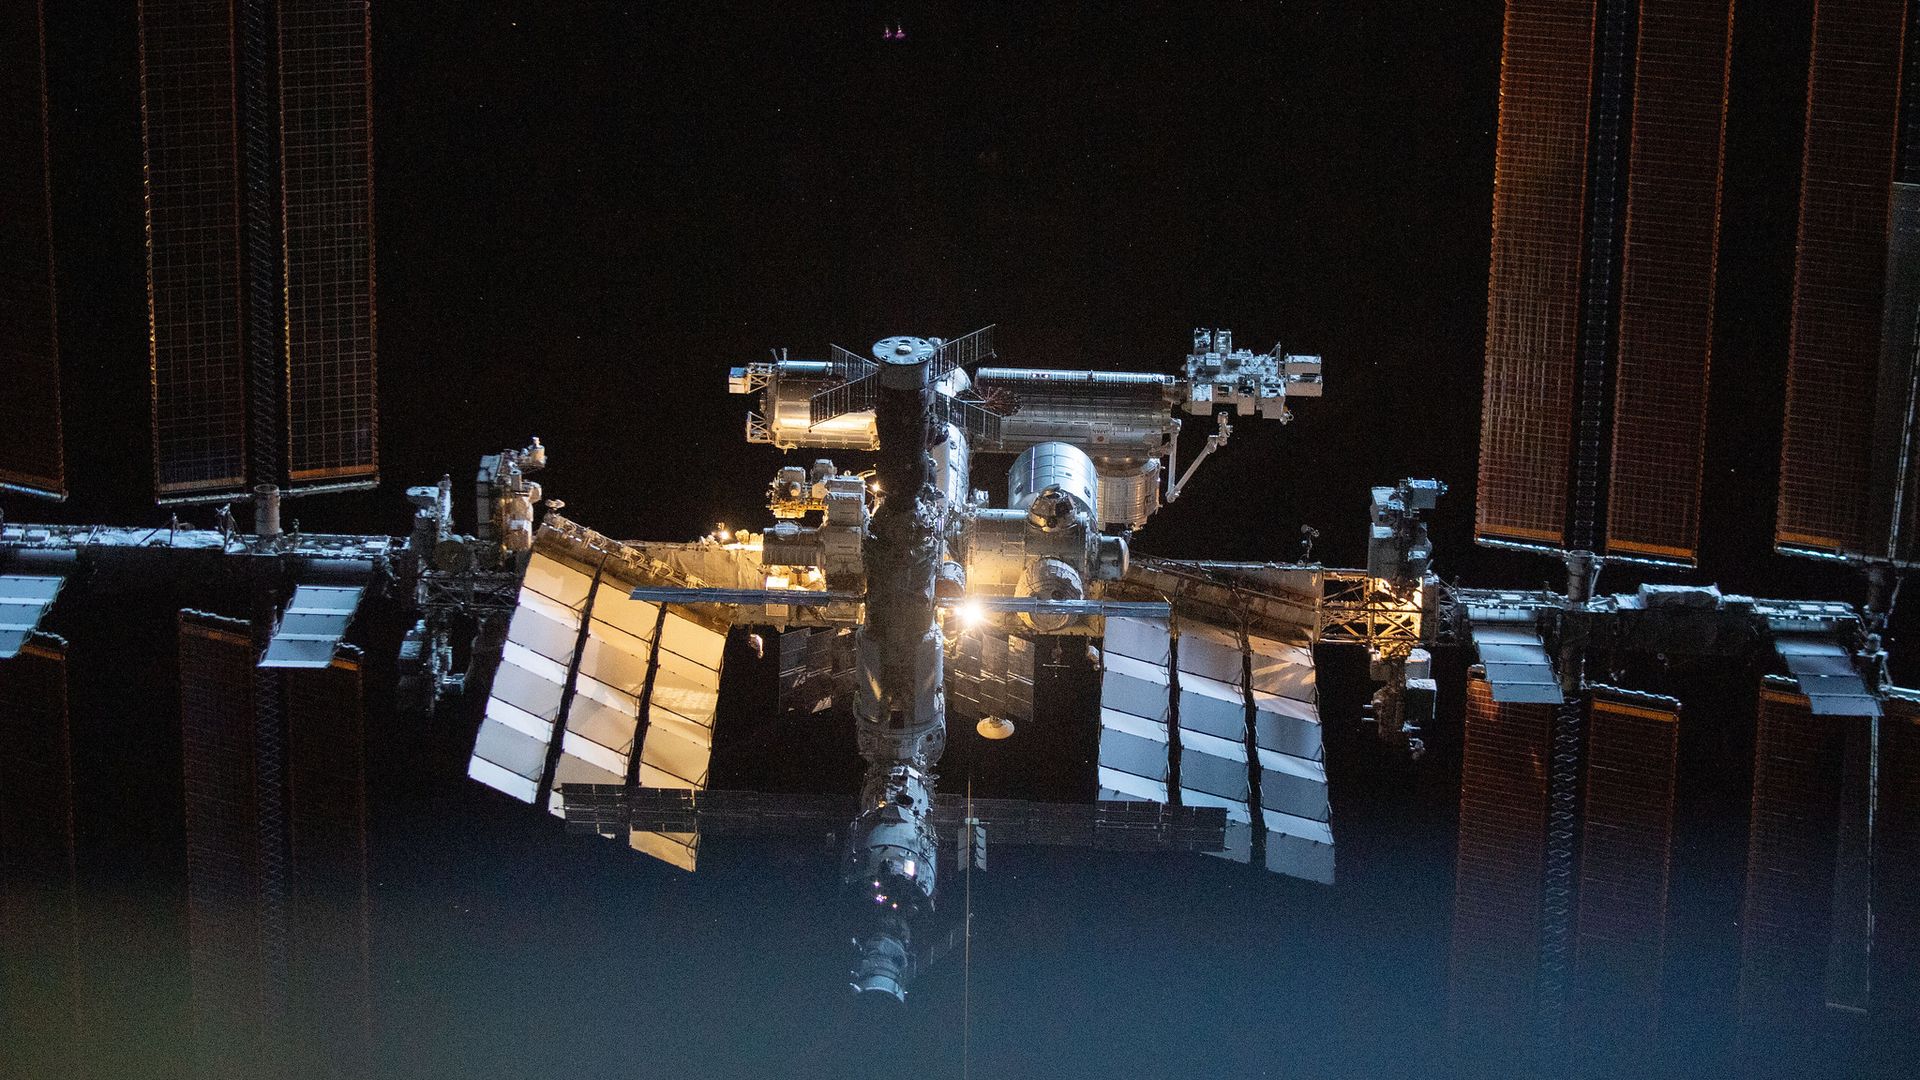 The International Space Station seen from afar in twilight